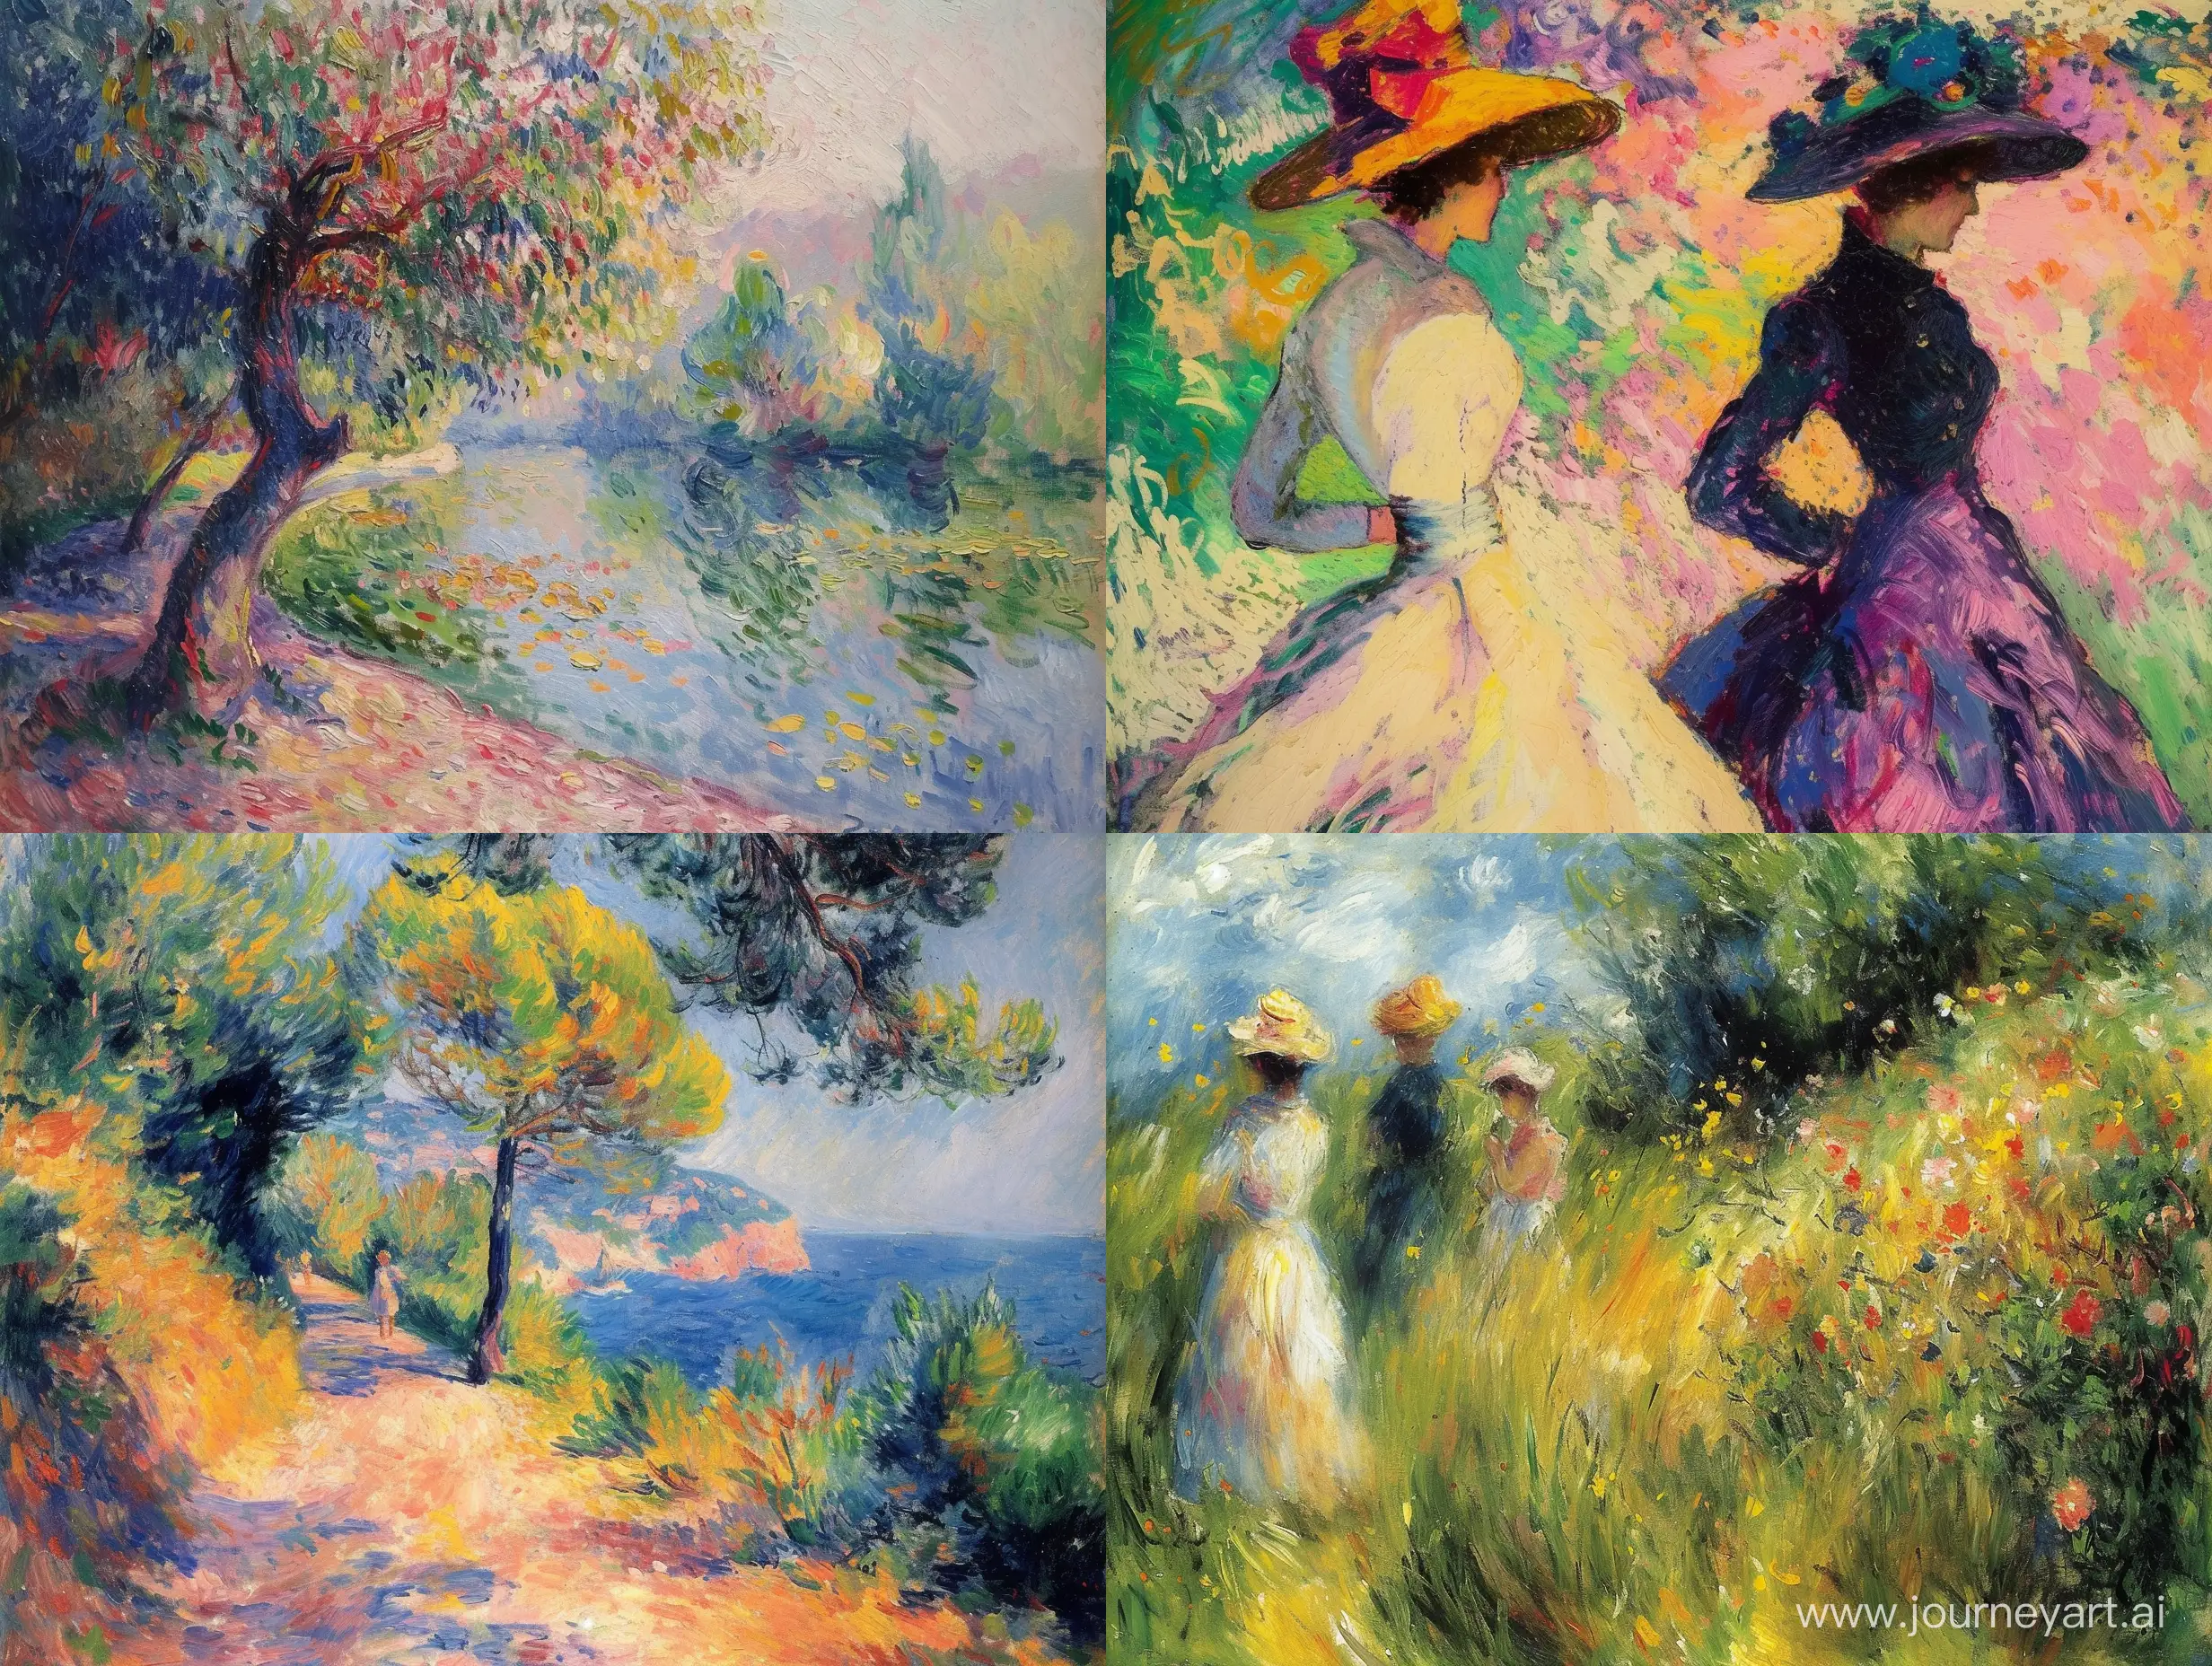 Vibrant-Impressionist-Art-with-Symbolic-Imagery-in-43-Aspect-Ratio